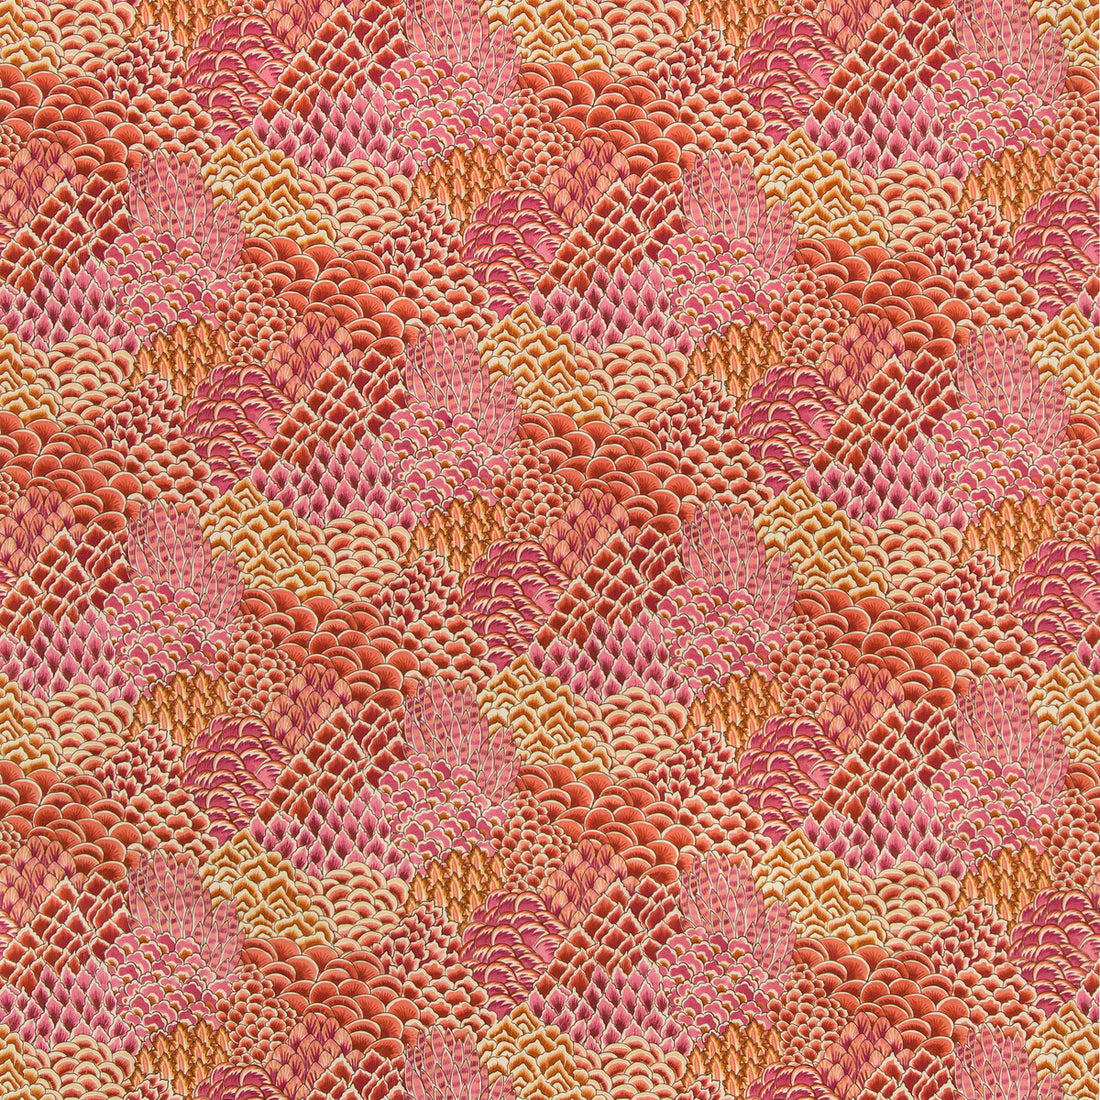 Katibi Print fabric in pink color - pattern 8020104.712.0 - by Brunschwig &amp; Fils in the Grand Bazaar collection